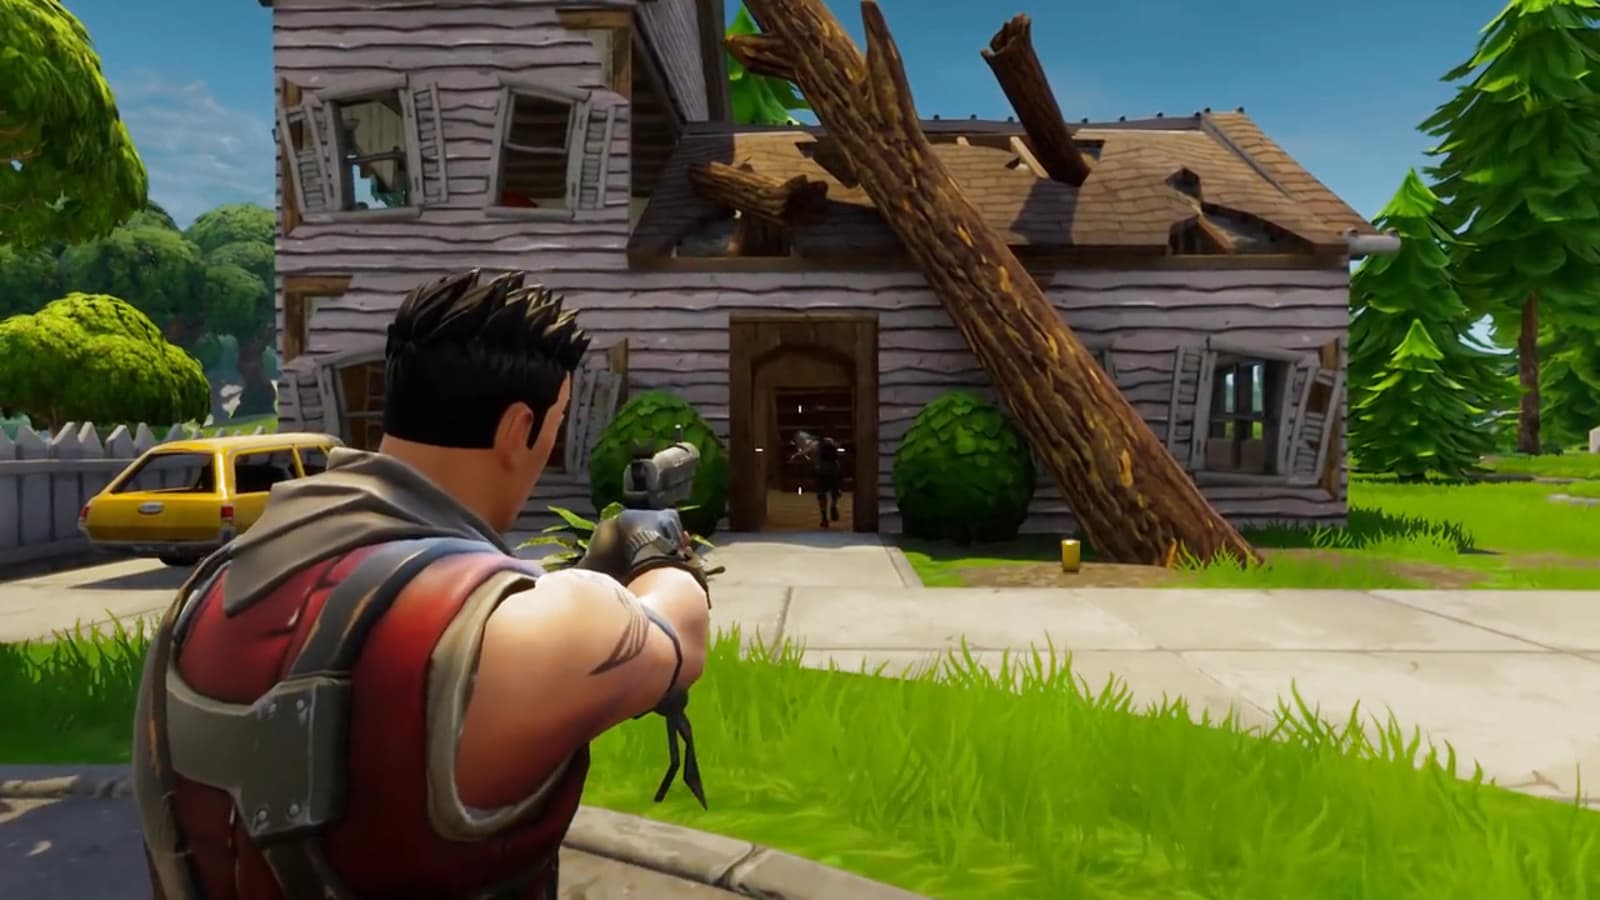 Apple Judge 'Inclined' Not to Unblock Epic's Fortnite App - Bloomberg